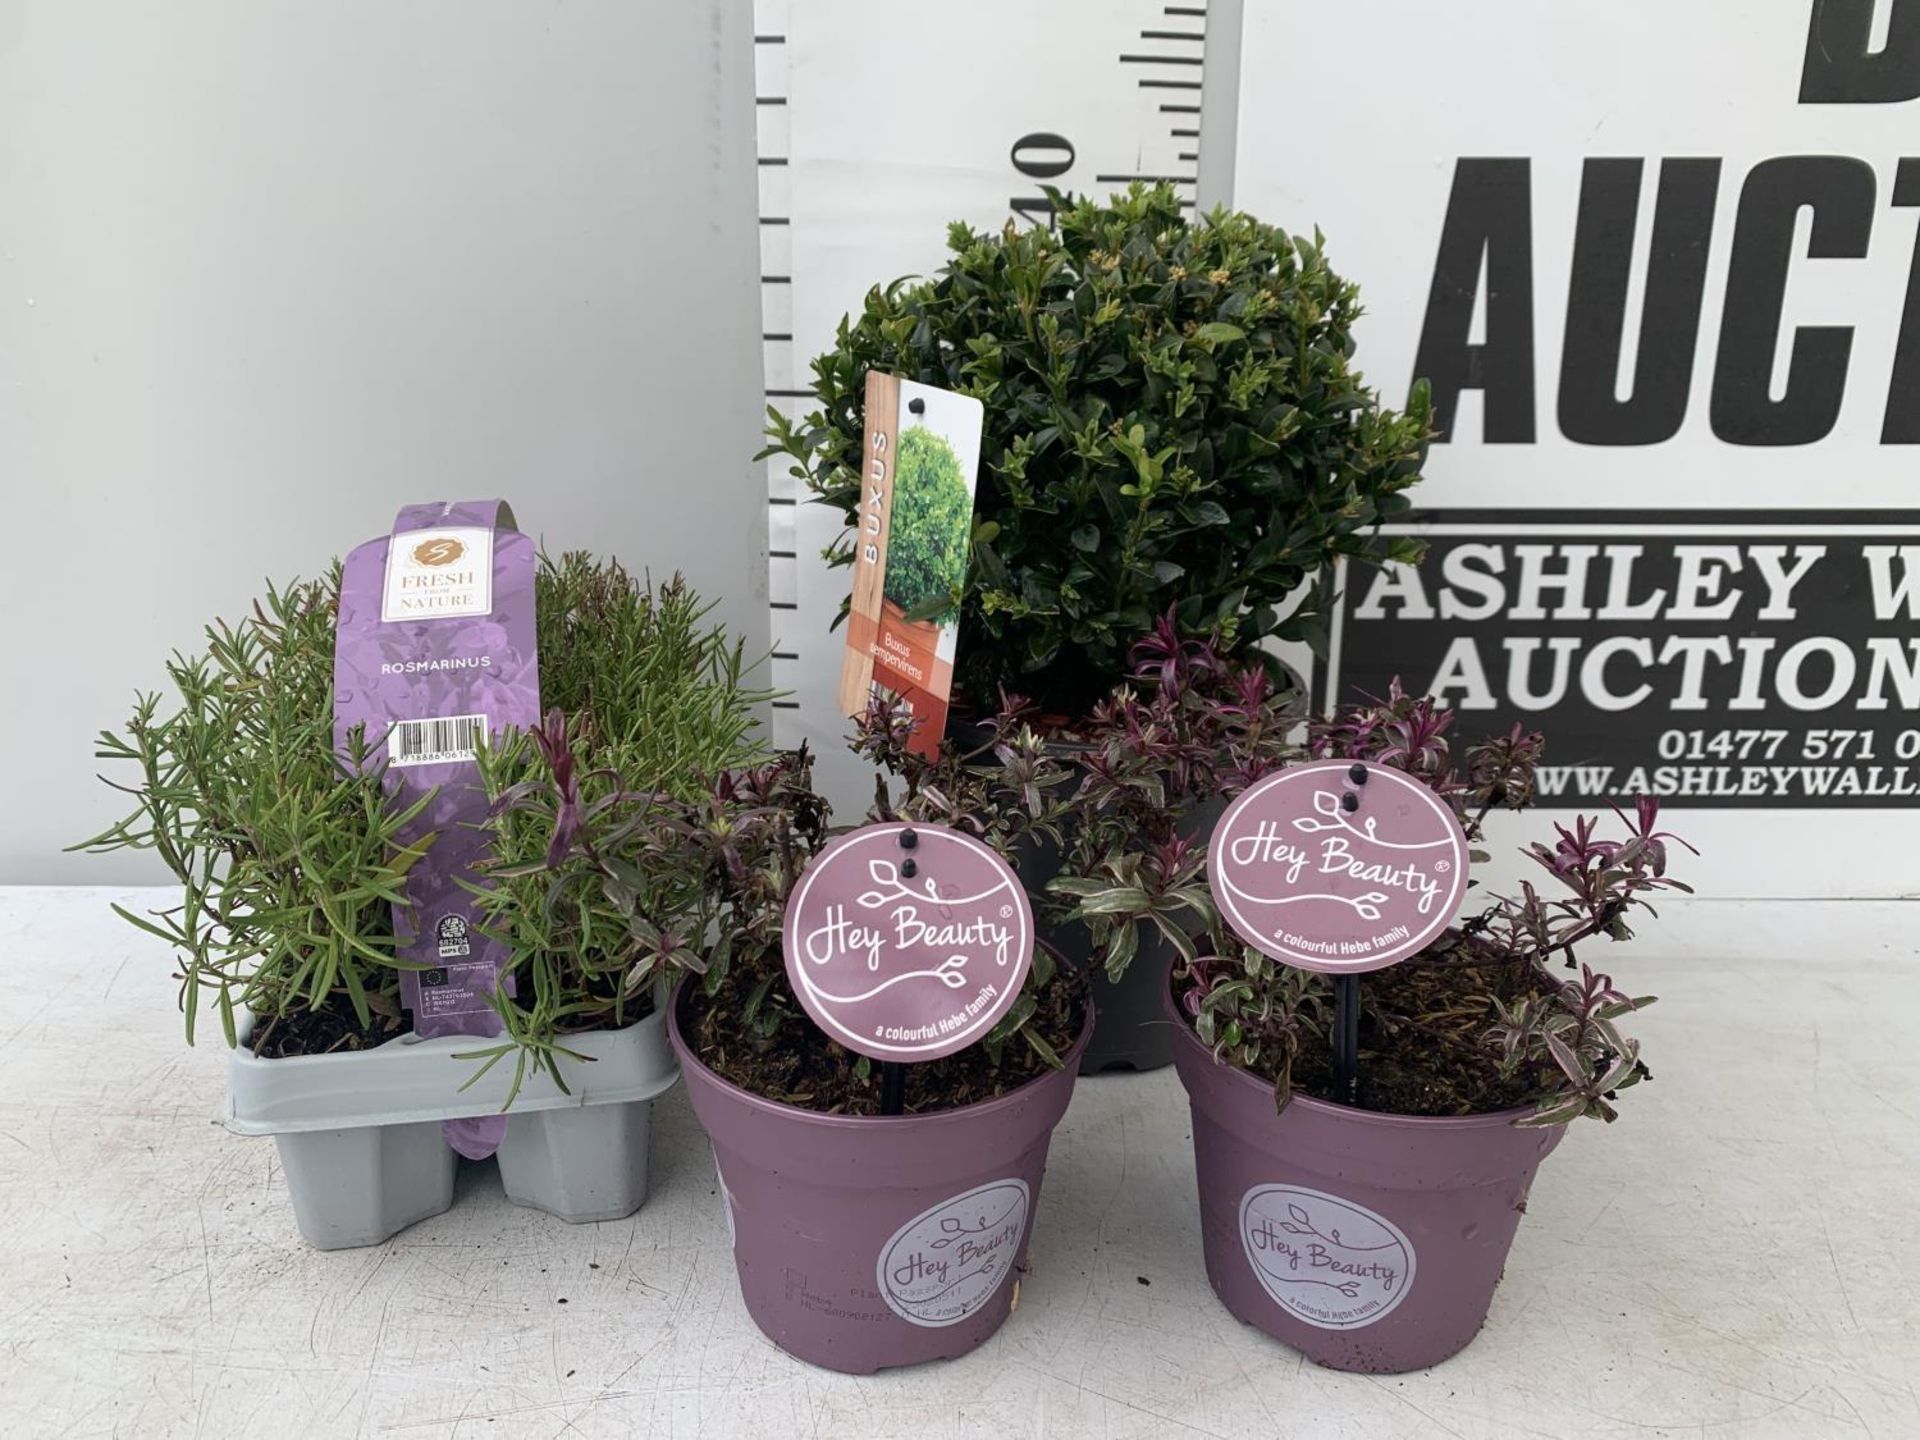 MIXED LOT OF PLANTS - ONE BUXUS SEMPERVIRENS IN A 2 LTR POT, SIX ROSEMARY PLUG PLANTS IN A CARRY - Image 2 of 10